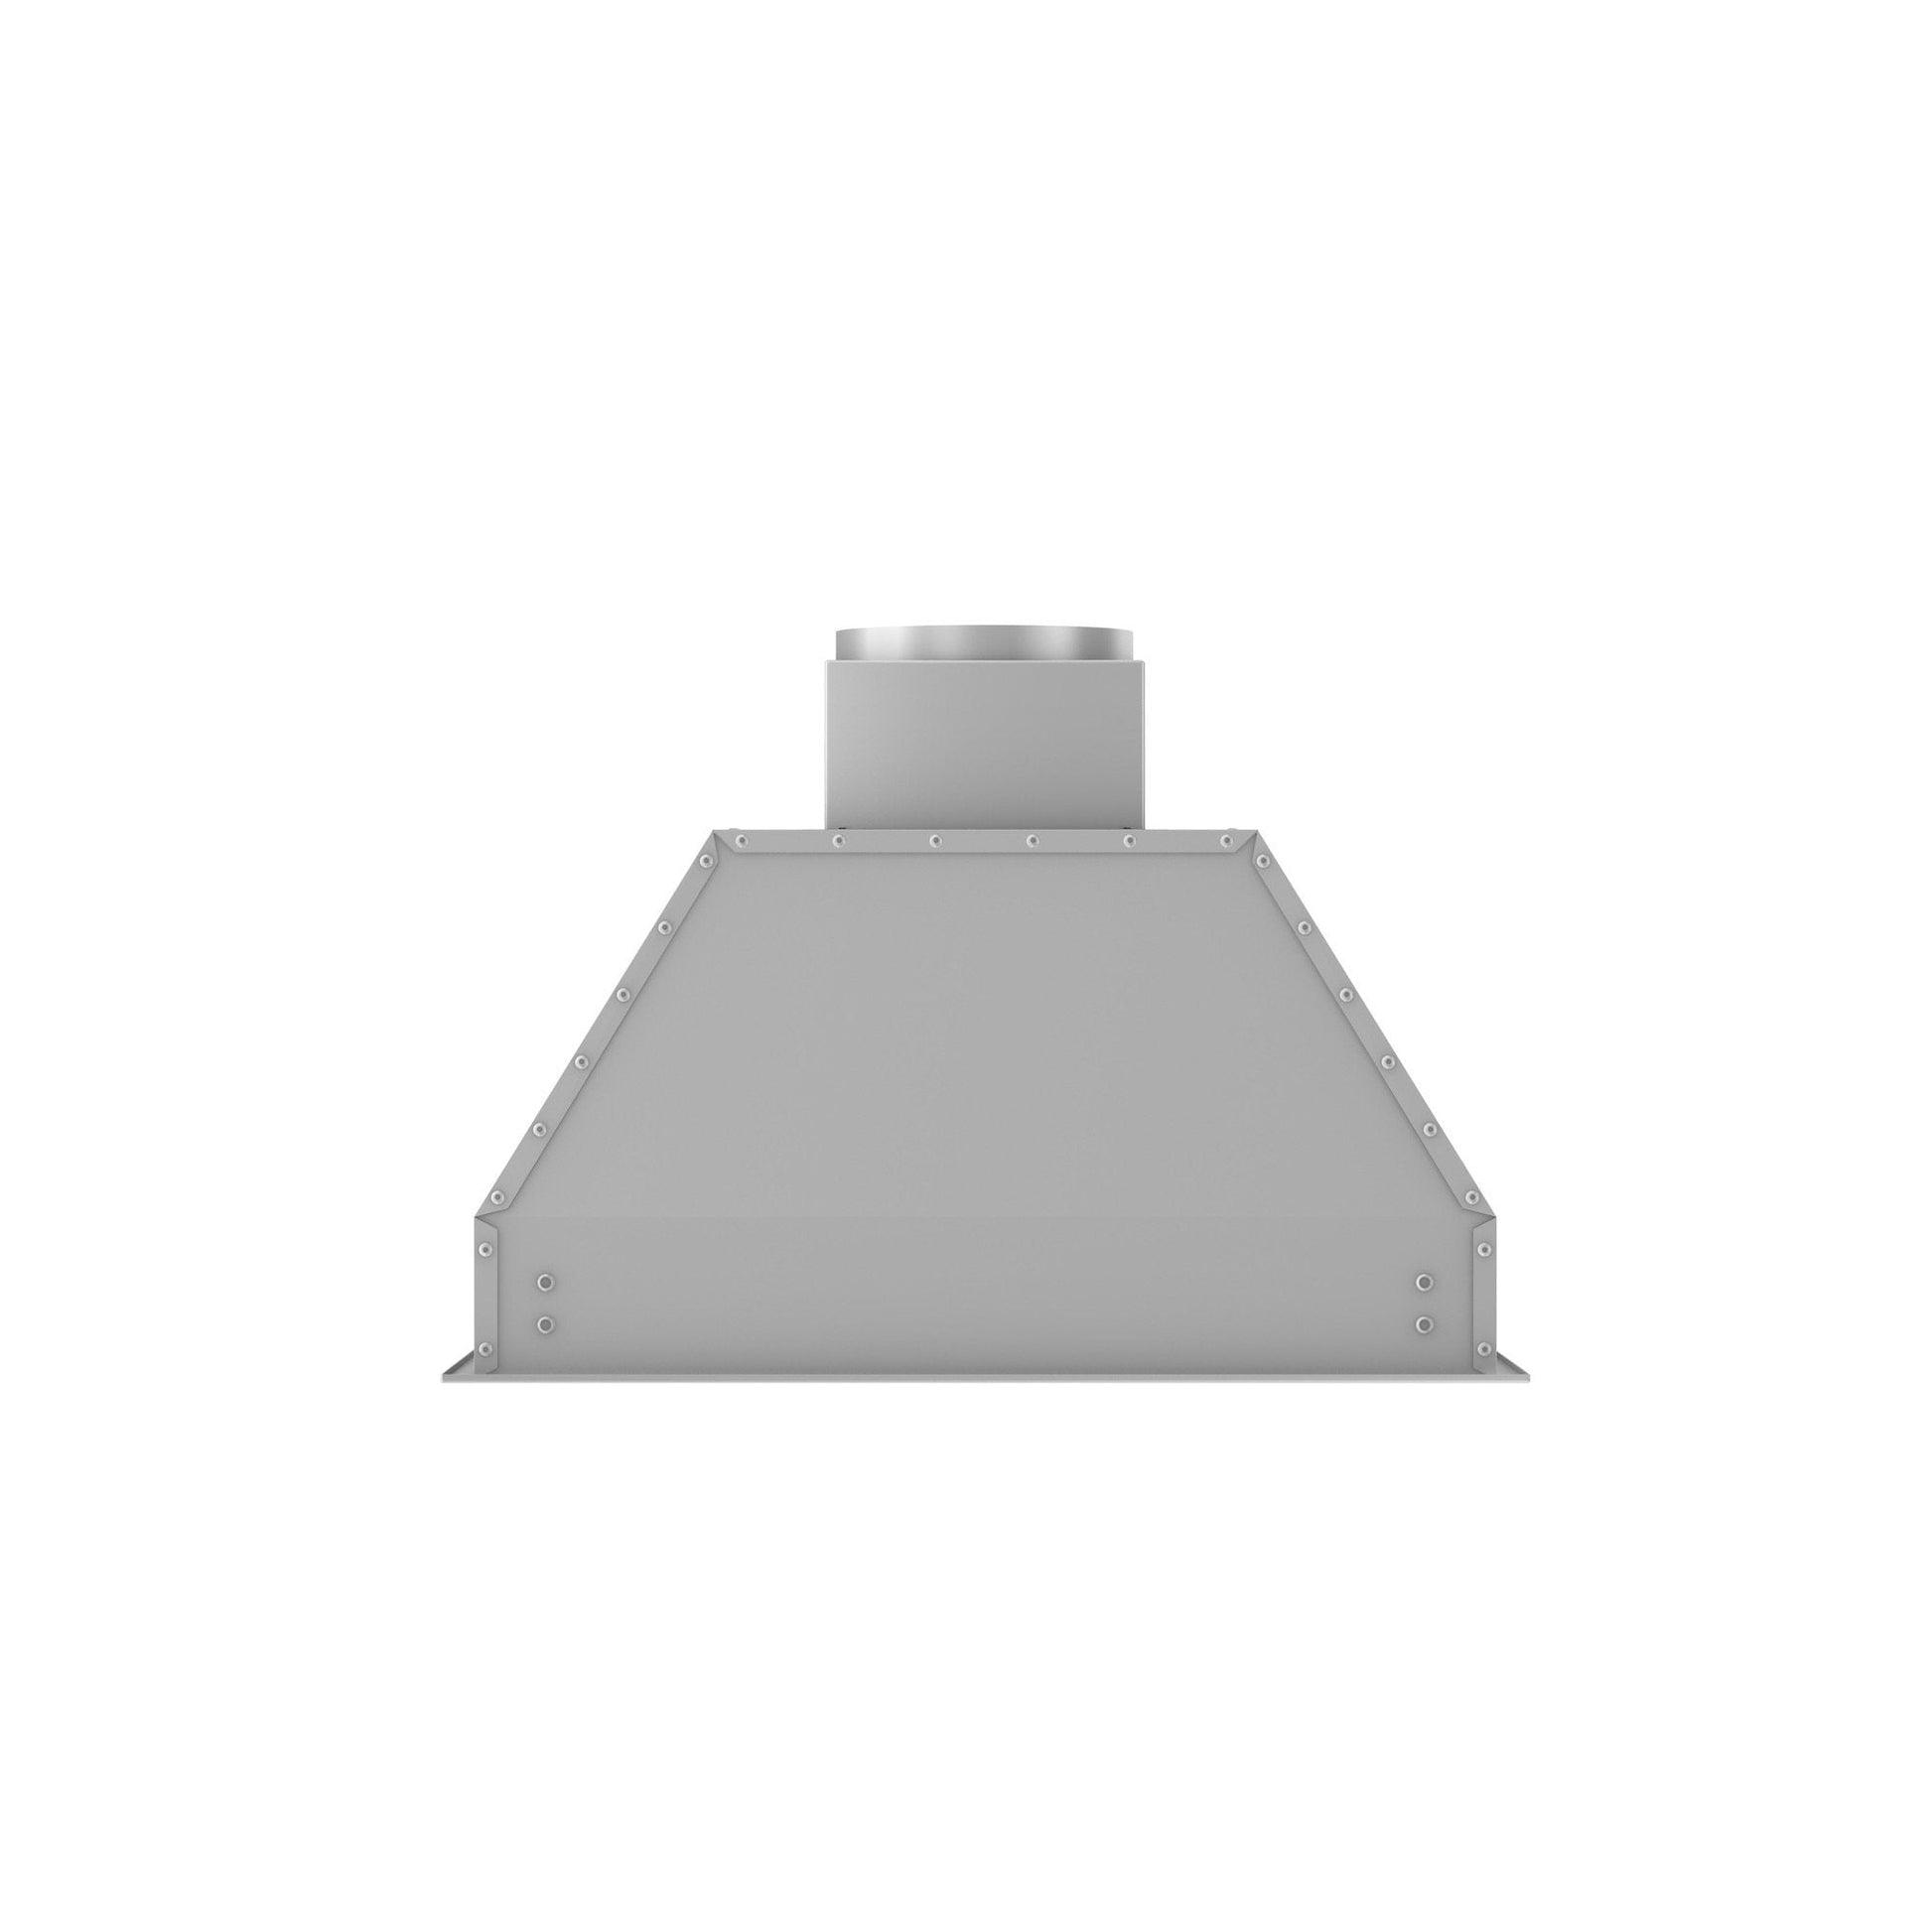 ZLINE Ducted Wall Mount Range Hood Insert in Stainless Steel (695) front above